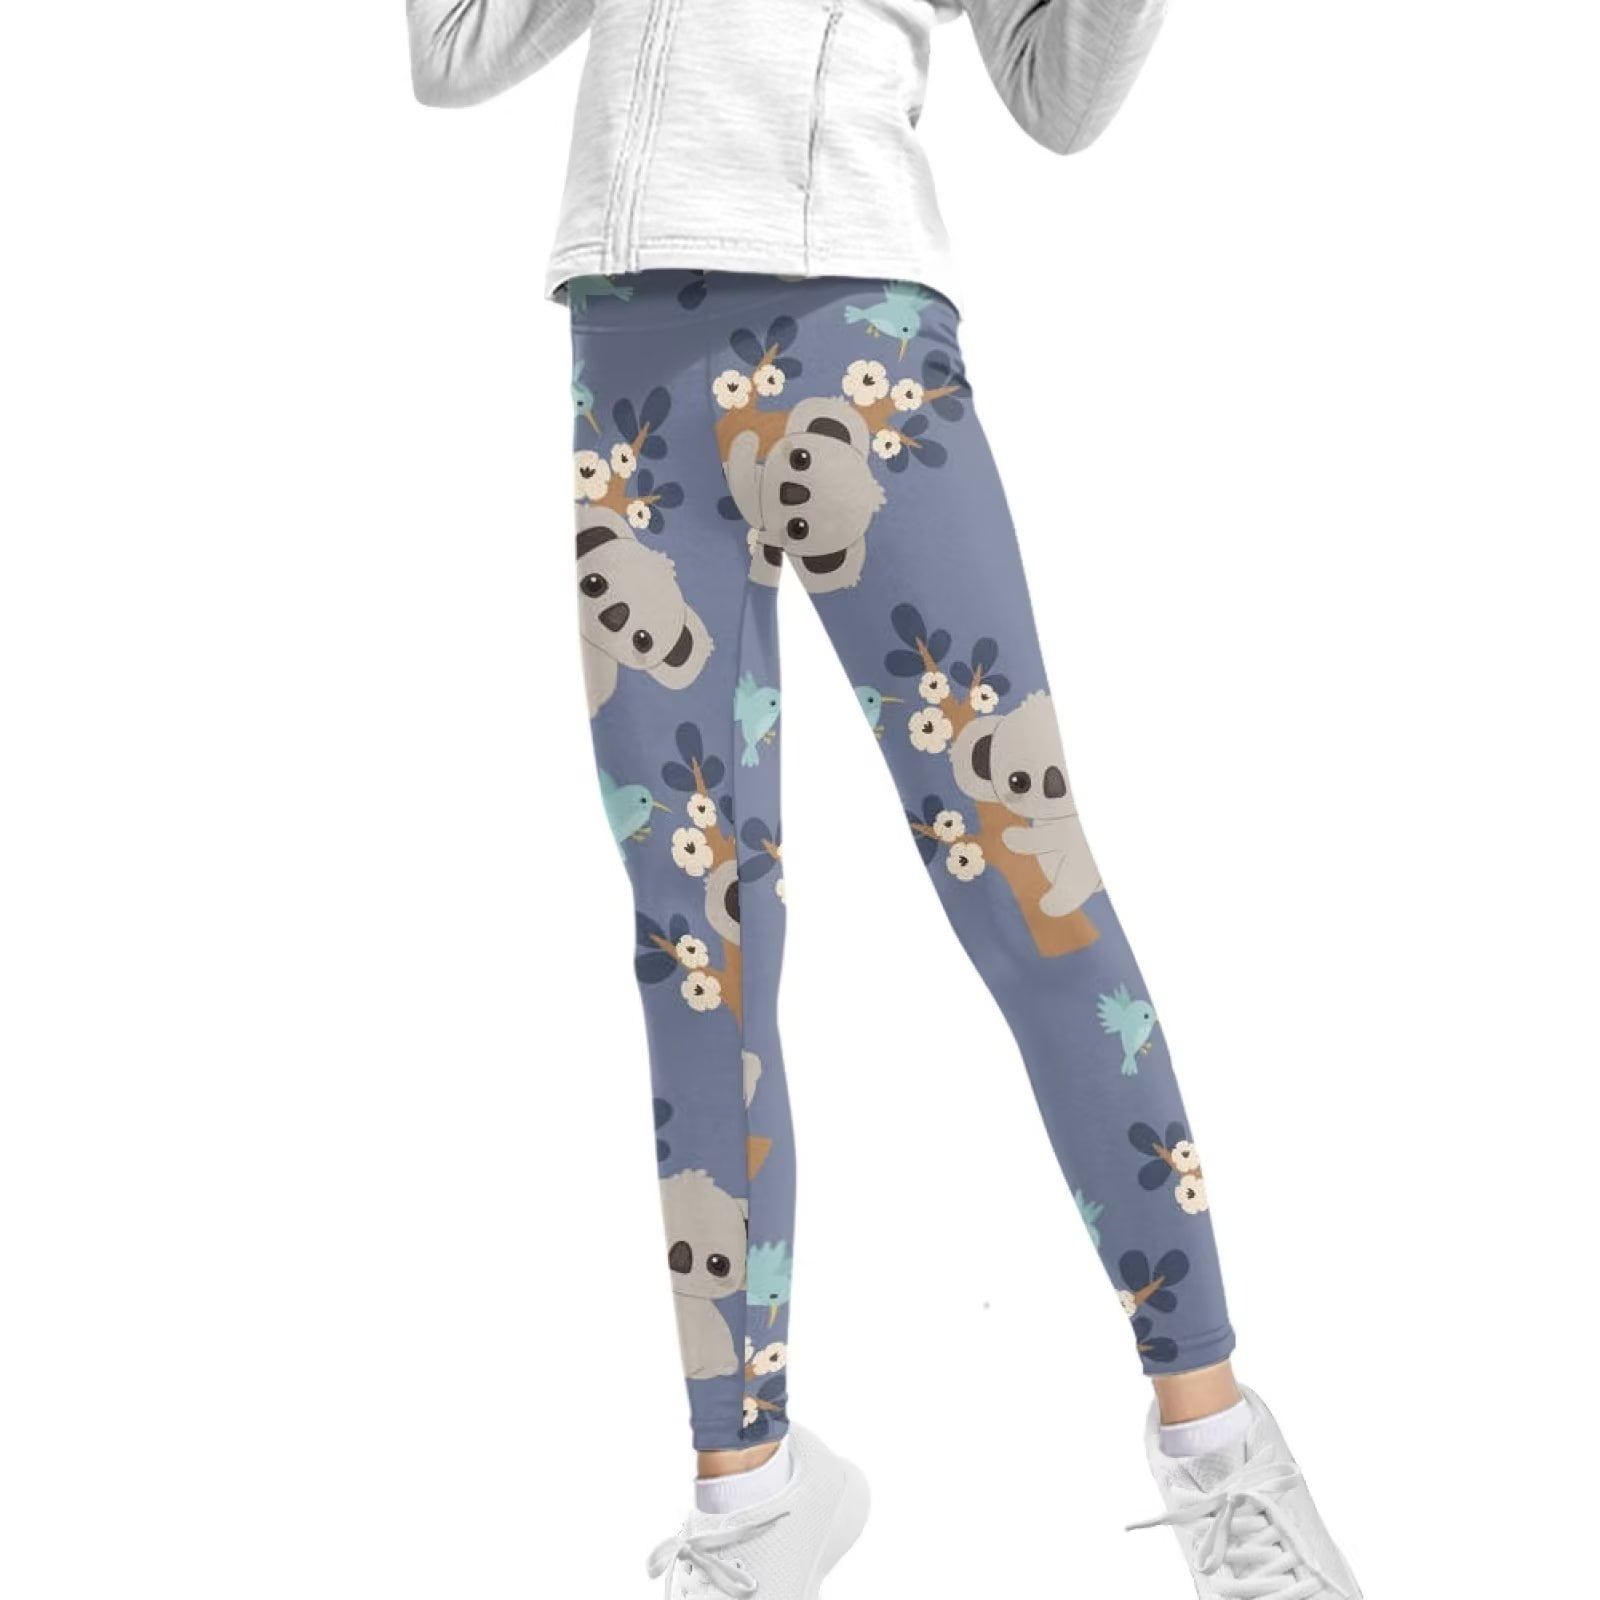 Kids Girls' Leggings flowers Rainbow Sport Toddlers pants Graphic Fashion  Outdoor 3-12 Years Summer Navy Blue Purple/Active/Tights/Cute 2024 - $8.99